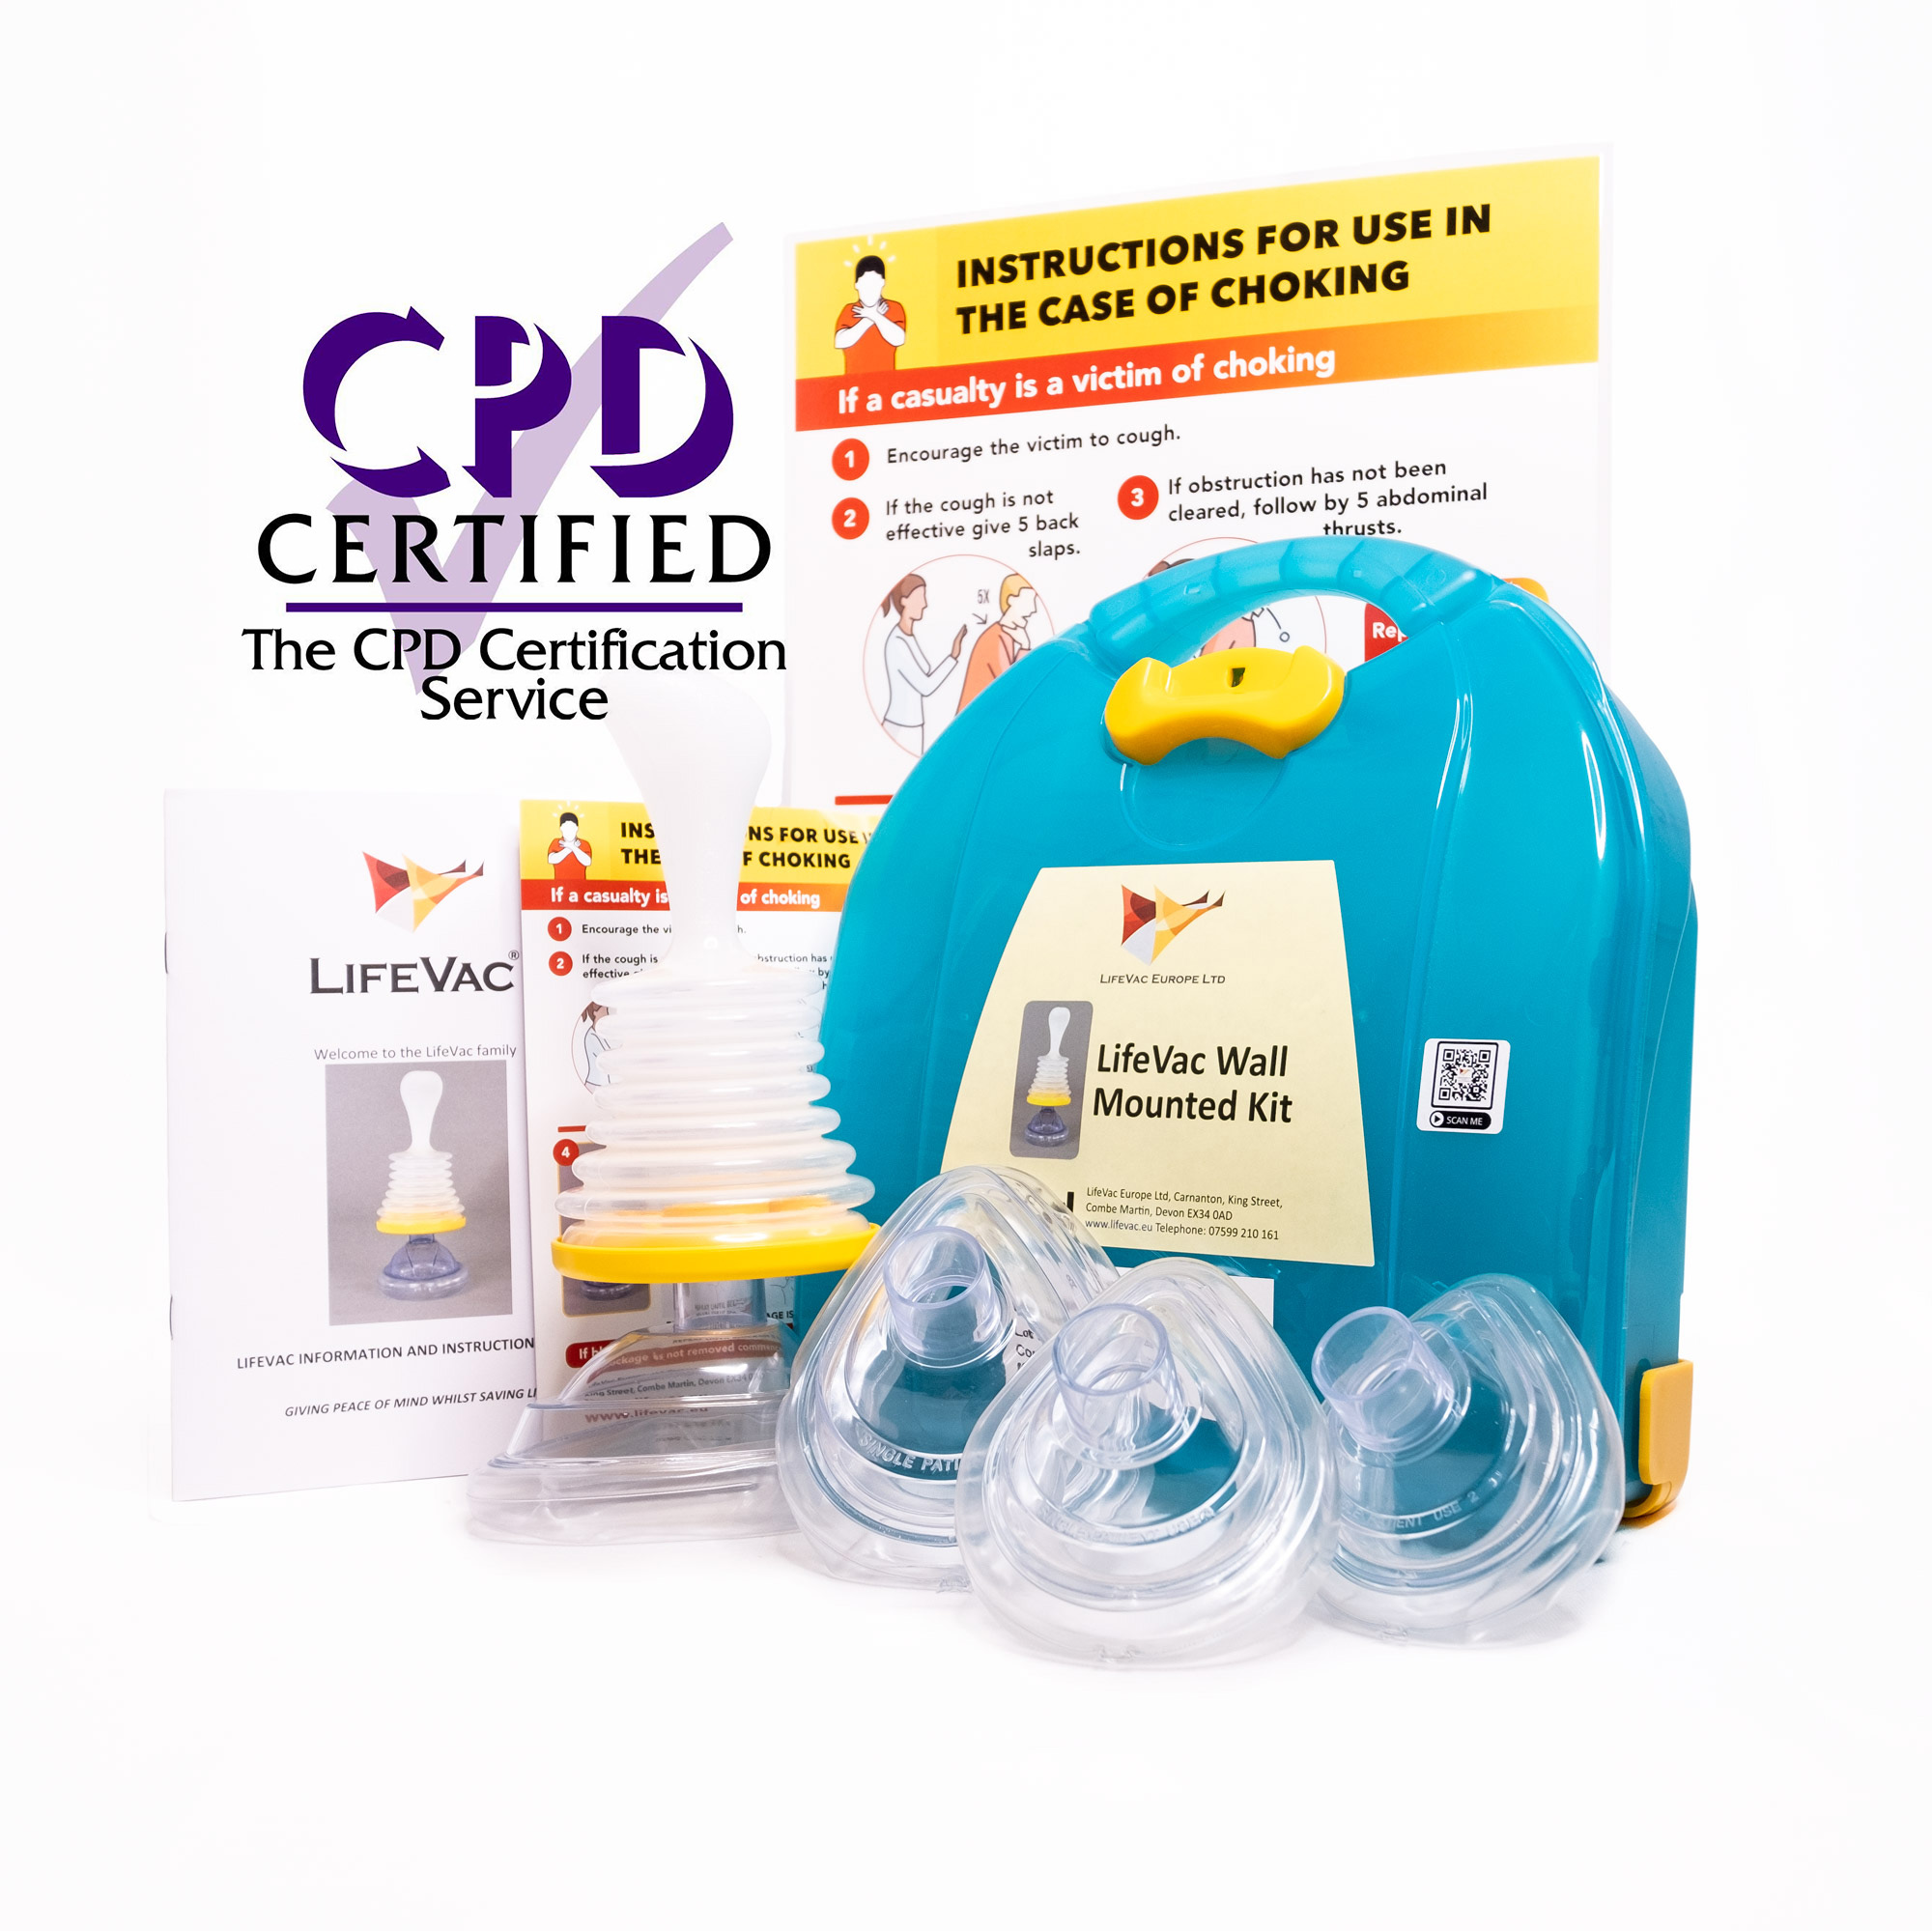 https://www.lifevac.uk/wp-content/uploads/2021/06/Wall-mounted-kit-with-contents-copy-CPD-1.jpg